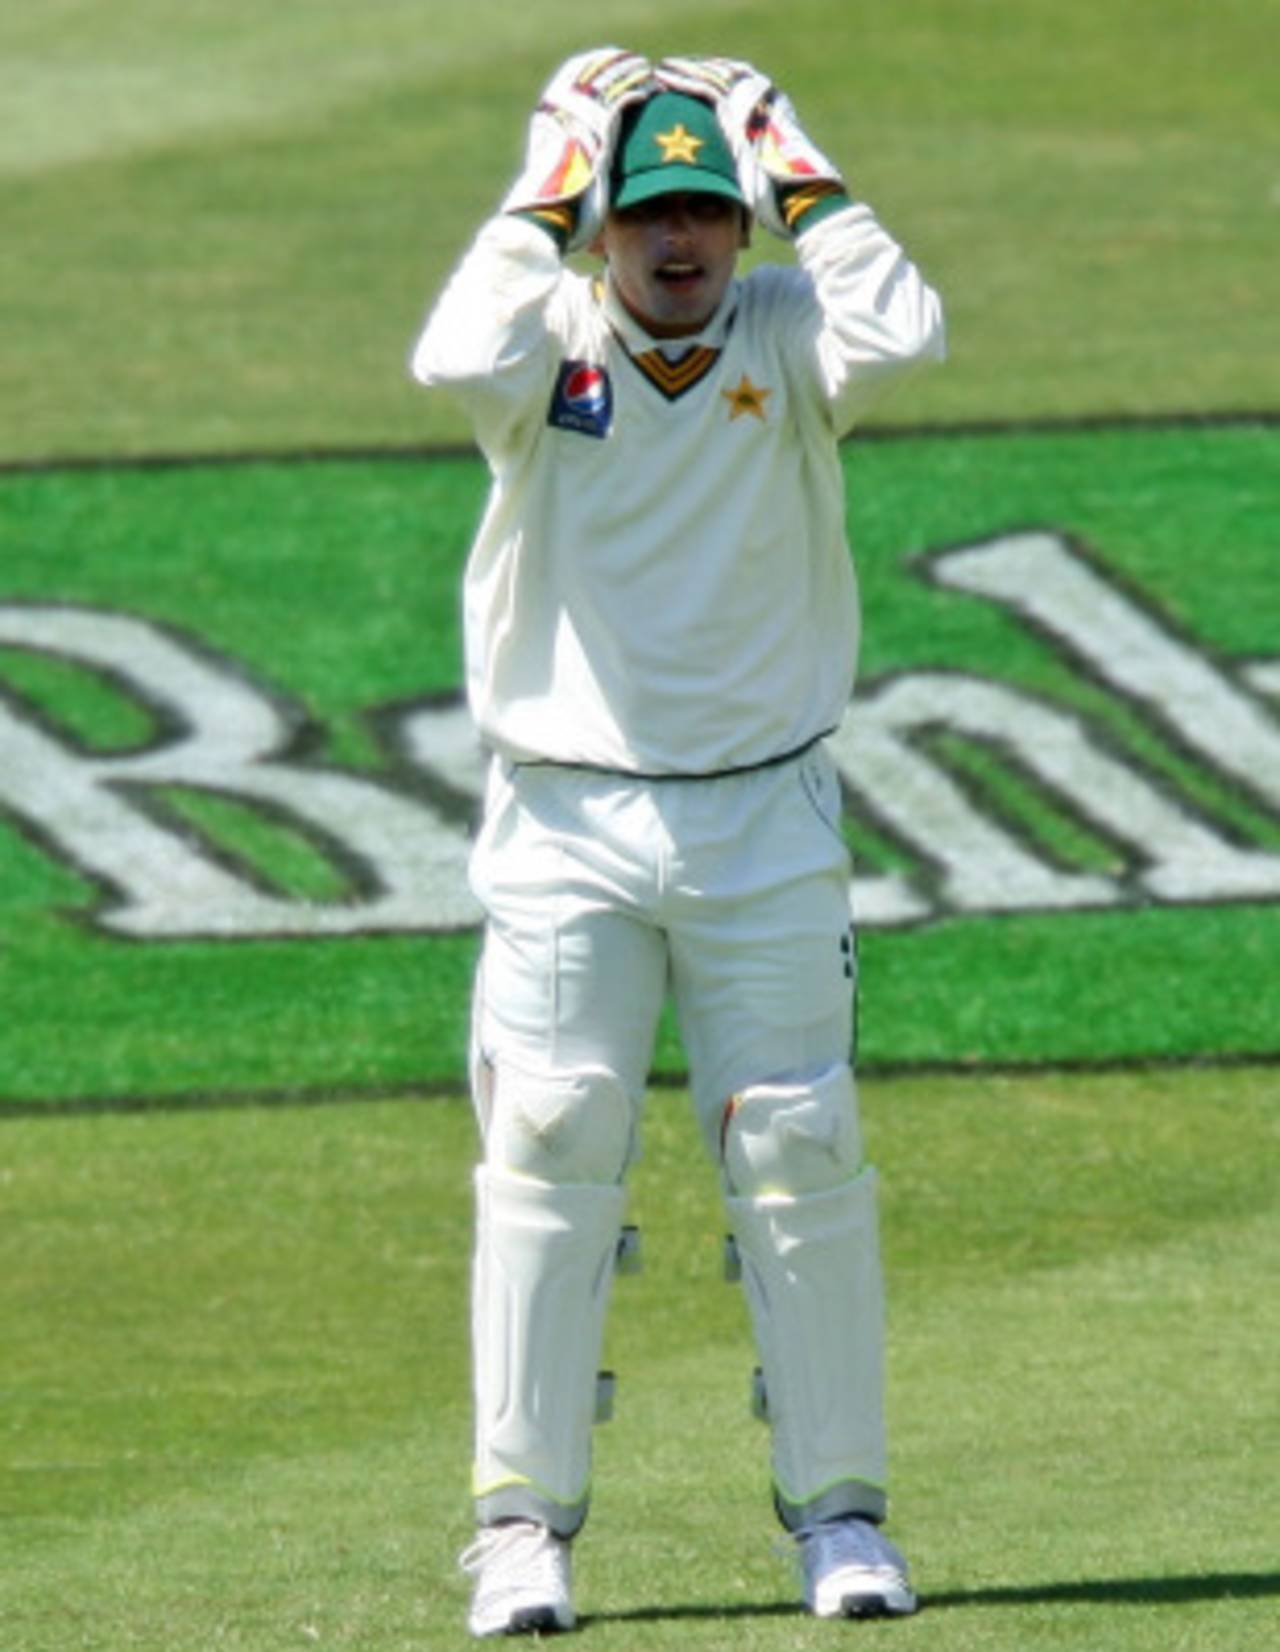 Adnan Akmal holds his cap on a windy day, New Zealand v Pakistan, 2nd Test, Wellington, 2nd day, January 16, 2011